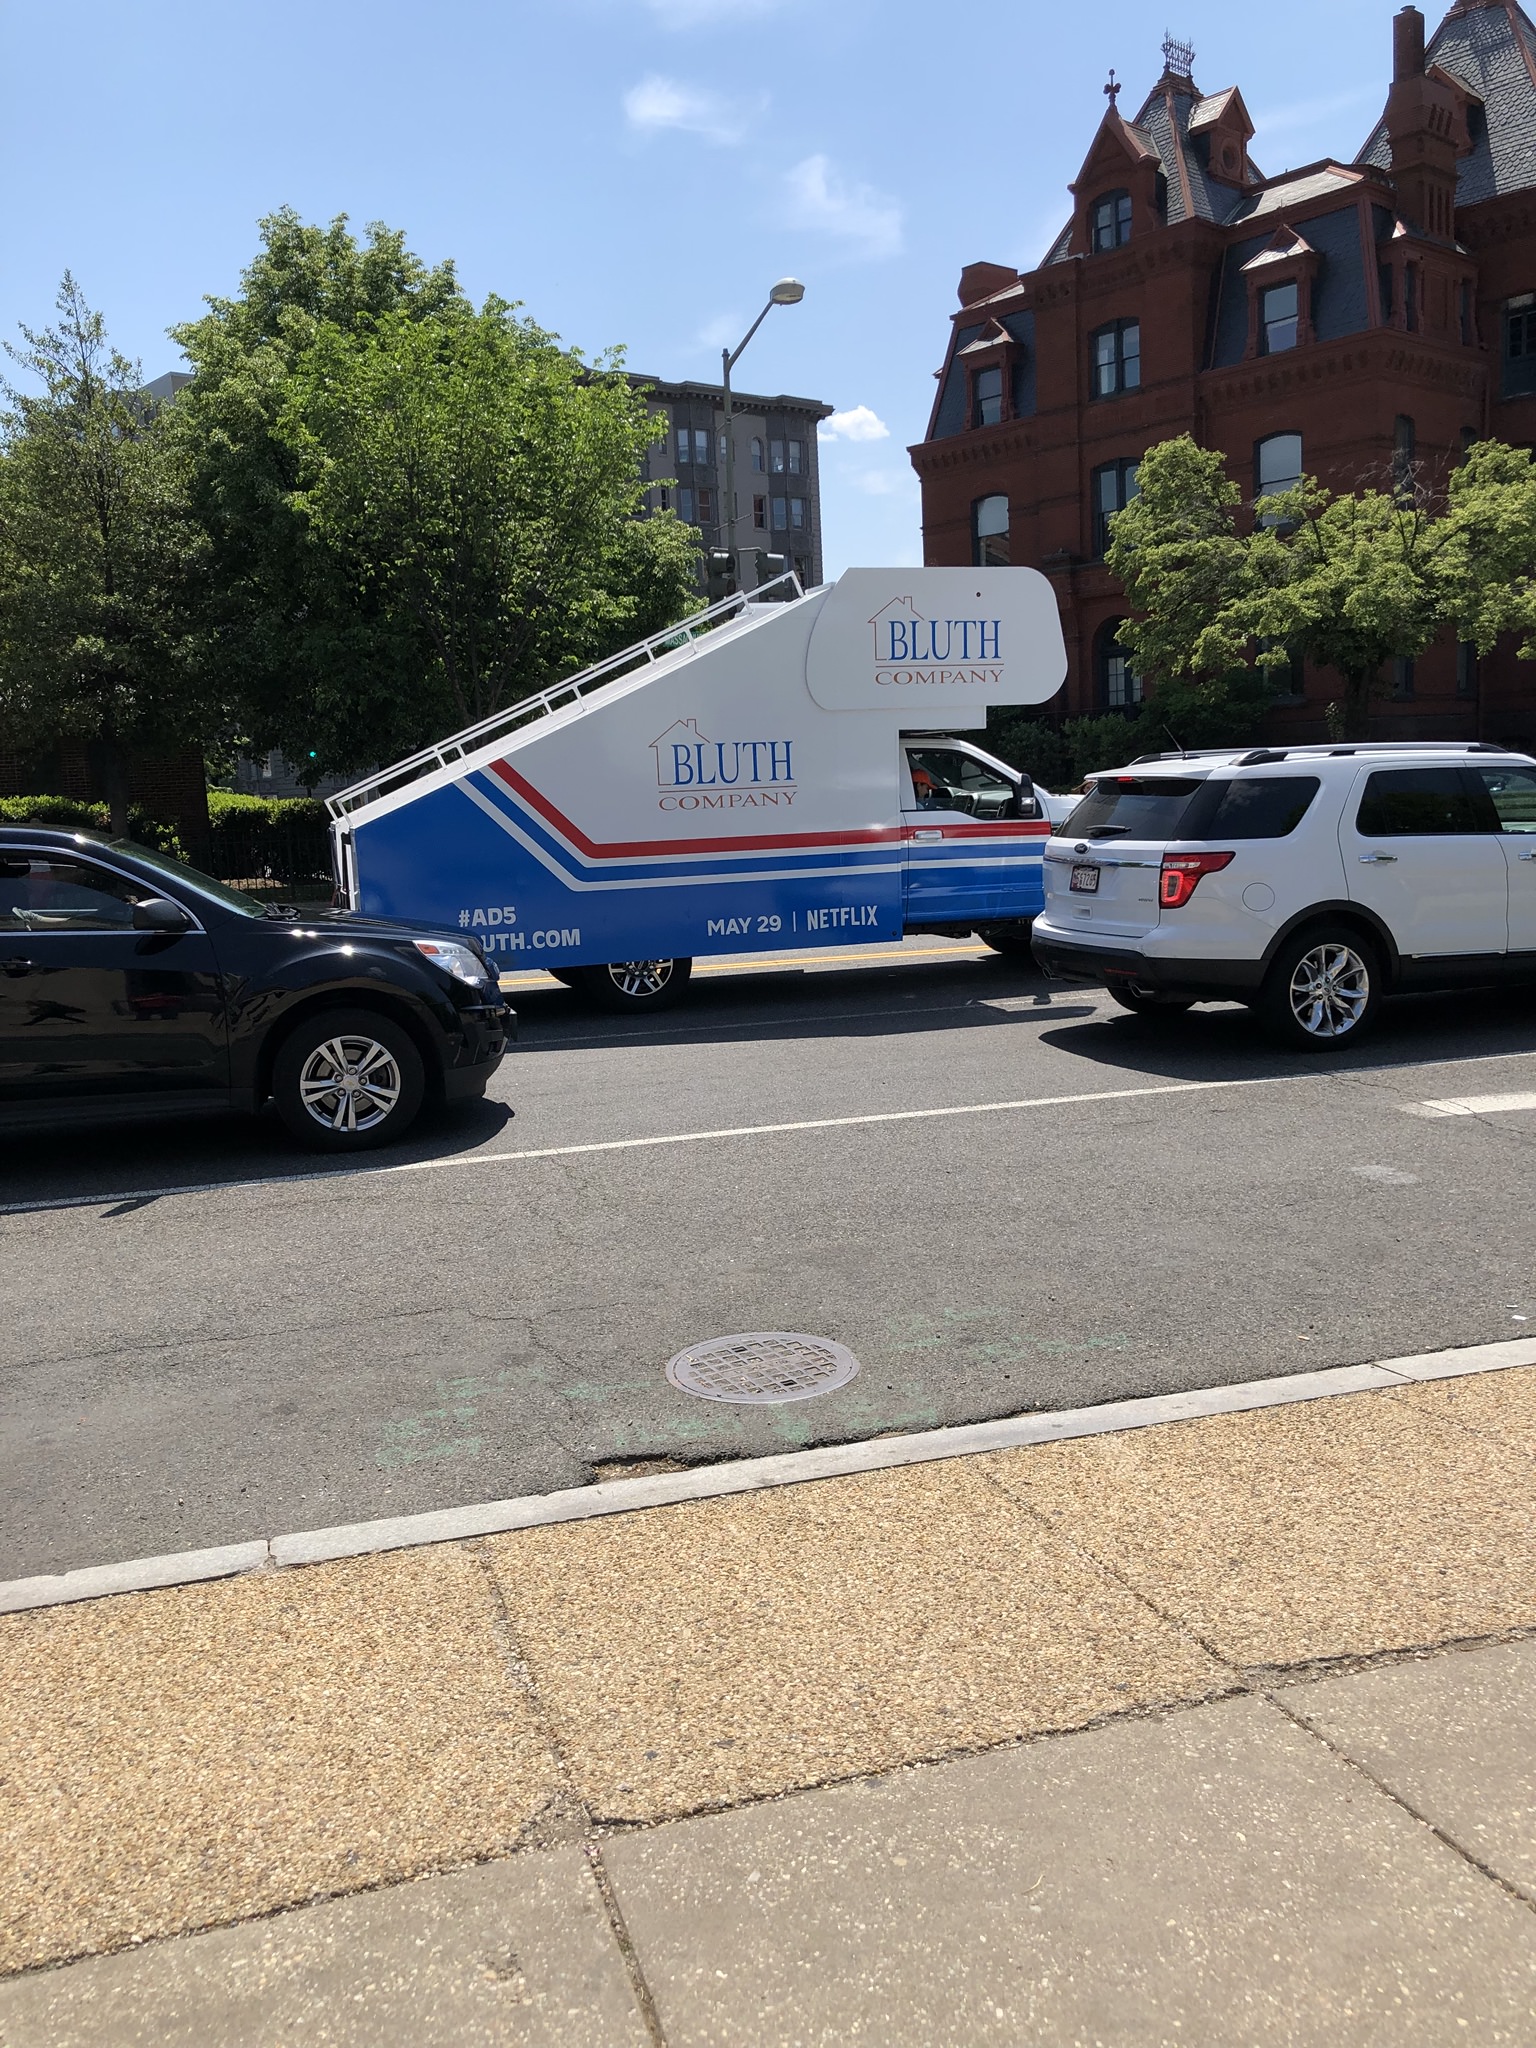 funny photo of the Bluth family stairs car found in the wild - a reference from Arrested Development